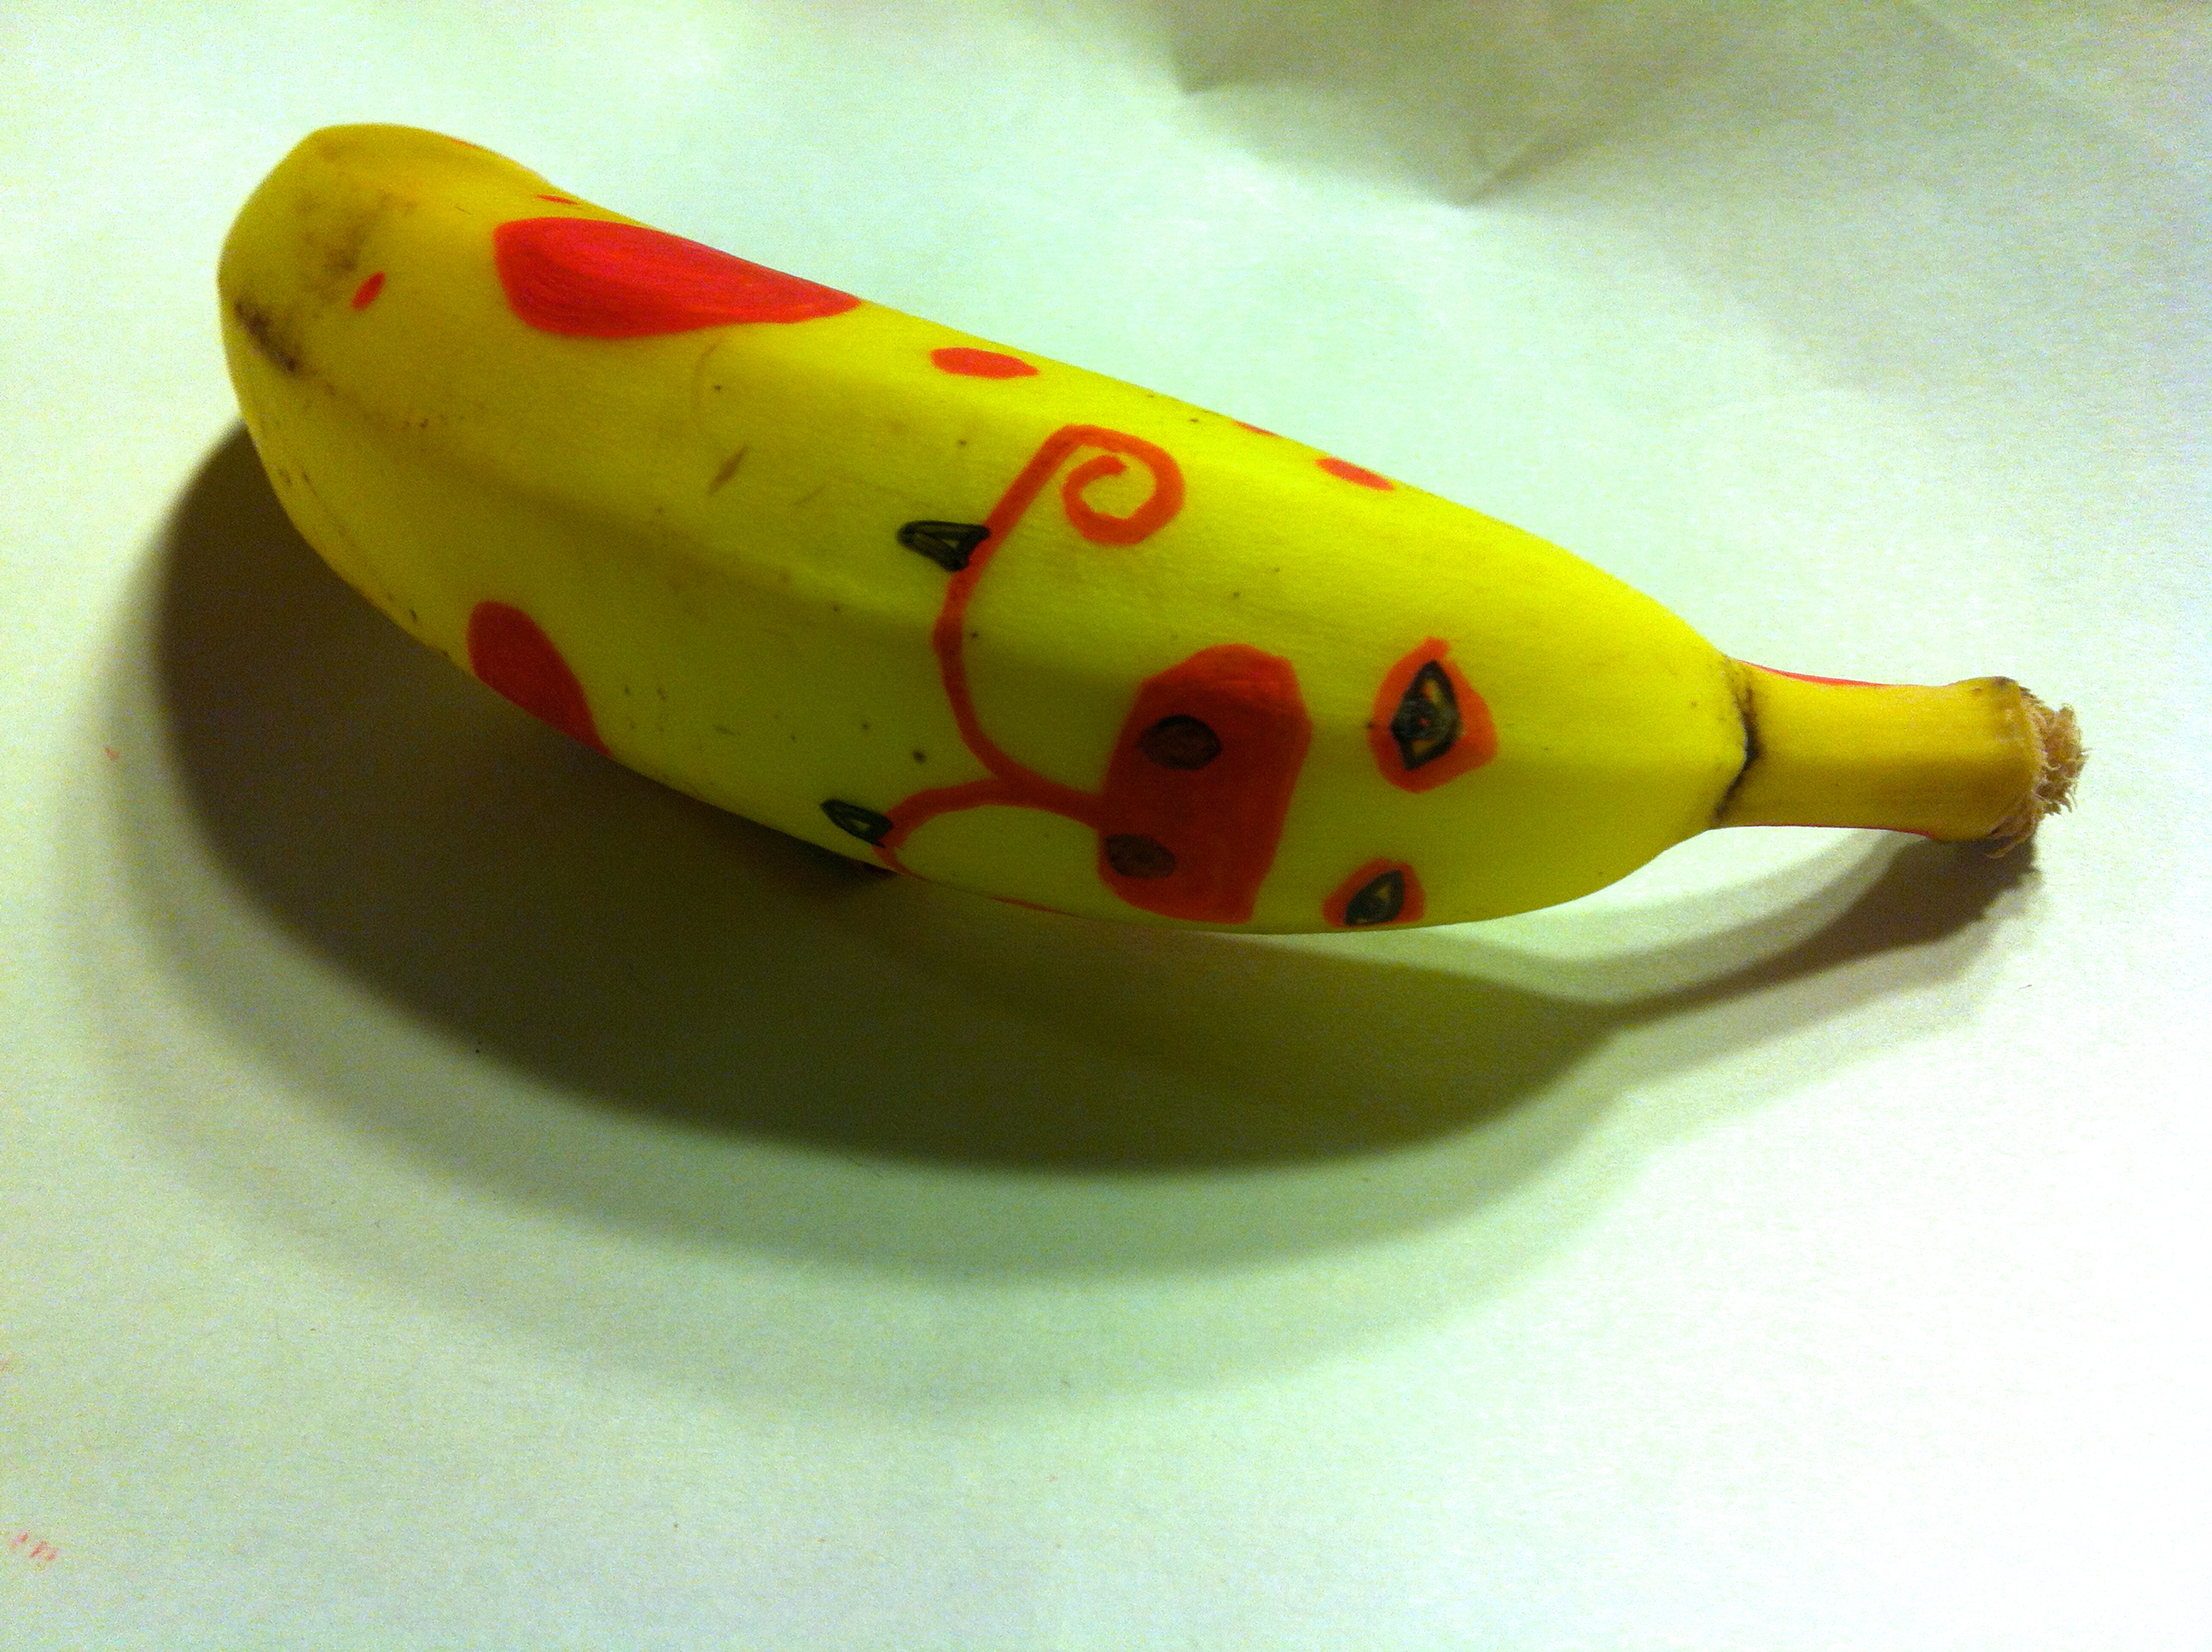 A spotted red leopard banana.